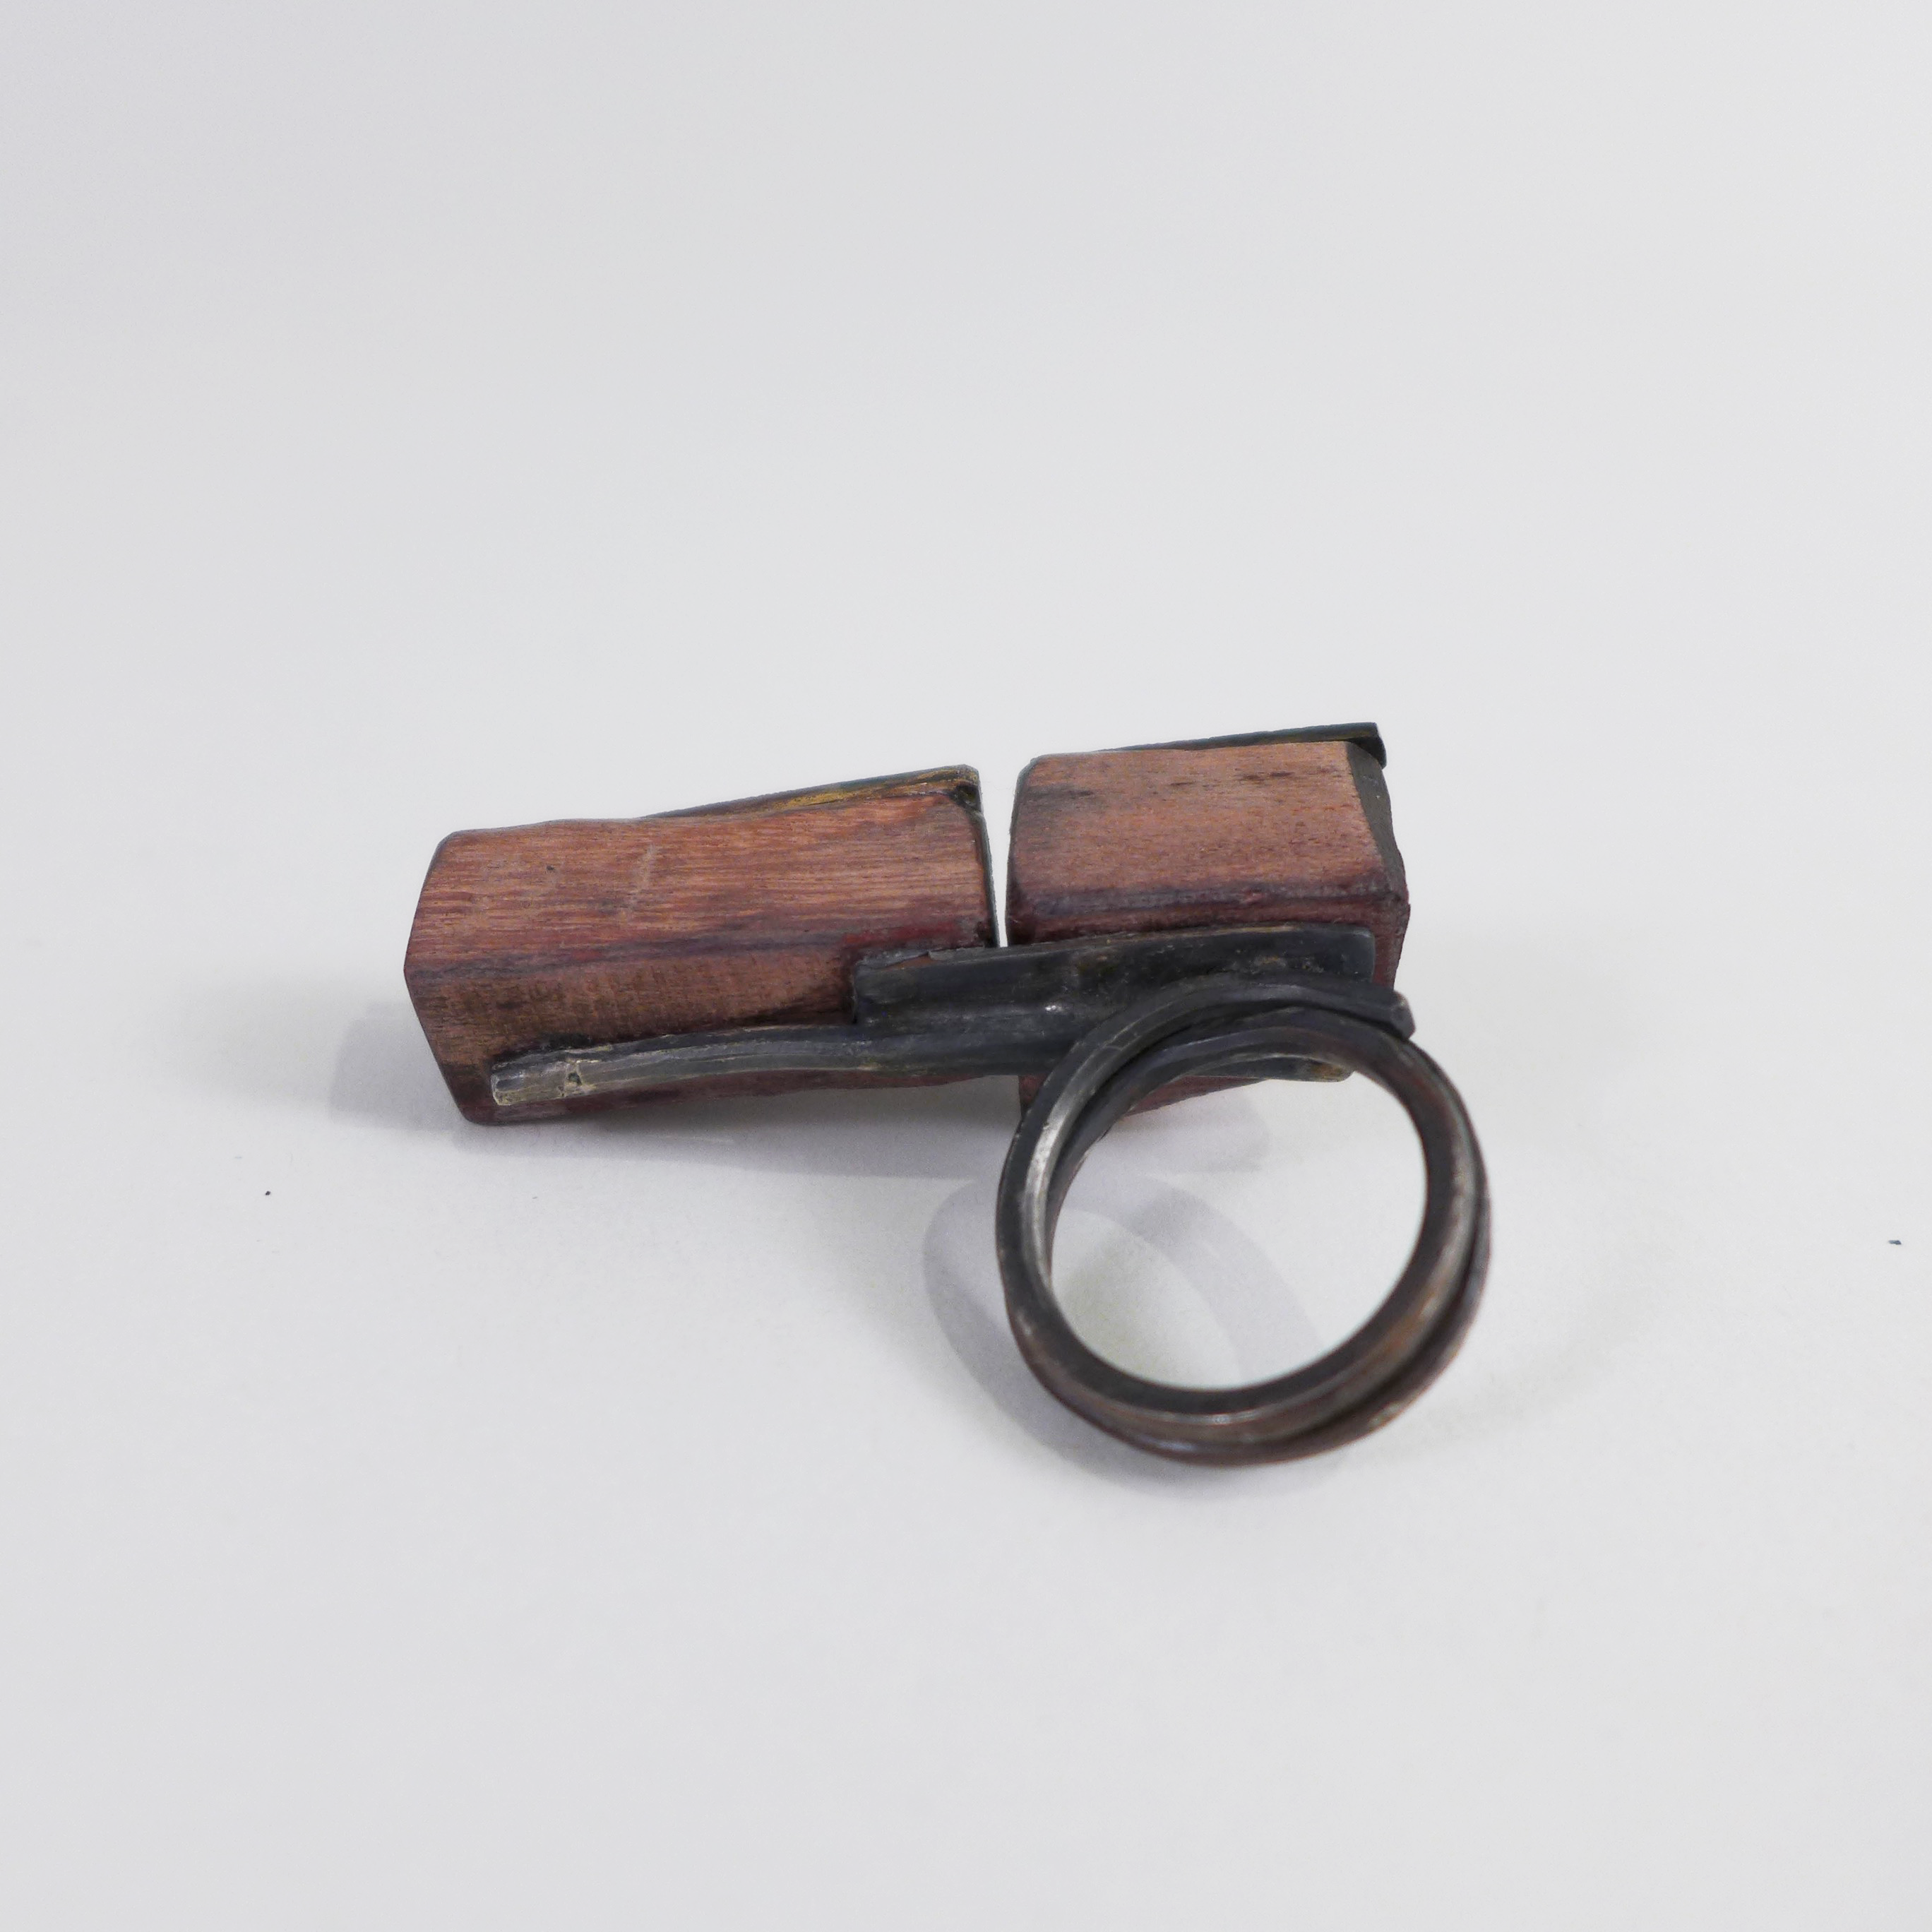 Purple Heart and Silver Ring, Contemporary wood jewelry by Israeli maker Dina Abargil at the Center for Art in Wood